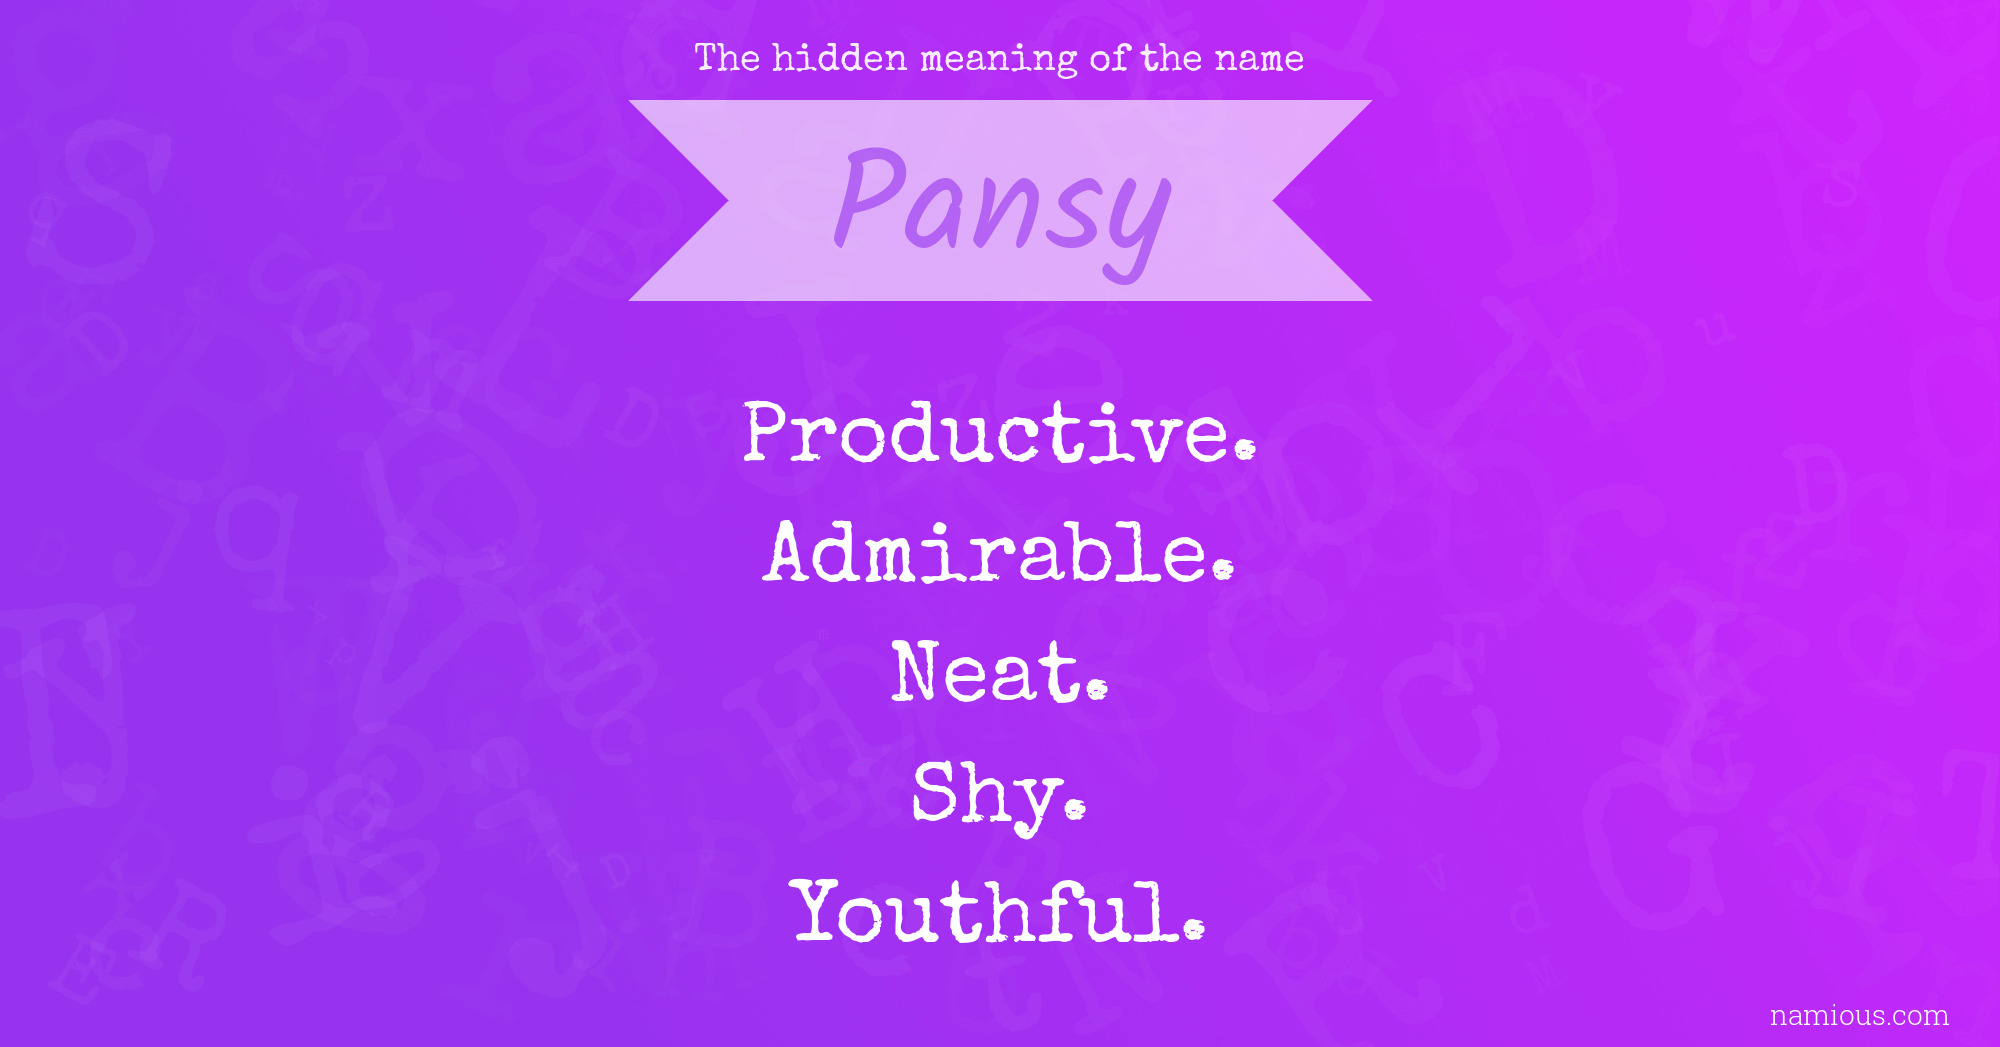 The hidden meaning of the name Pansy